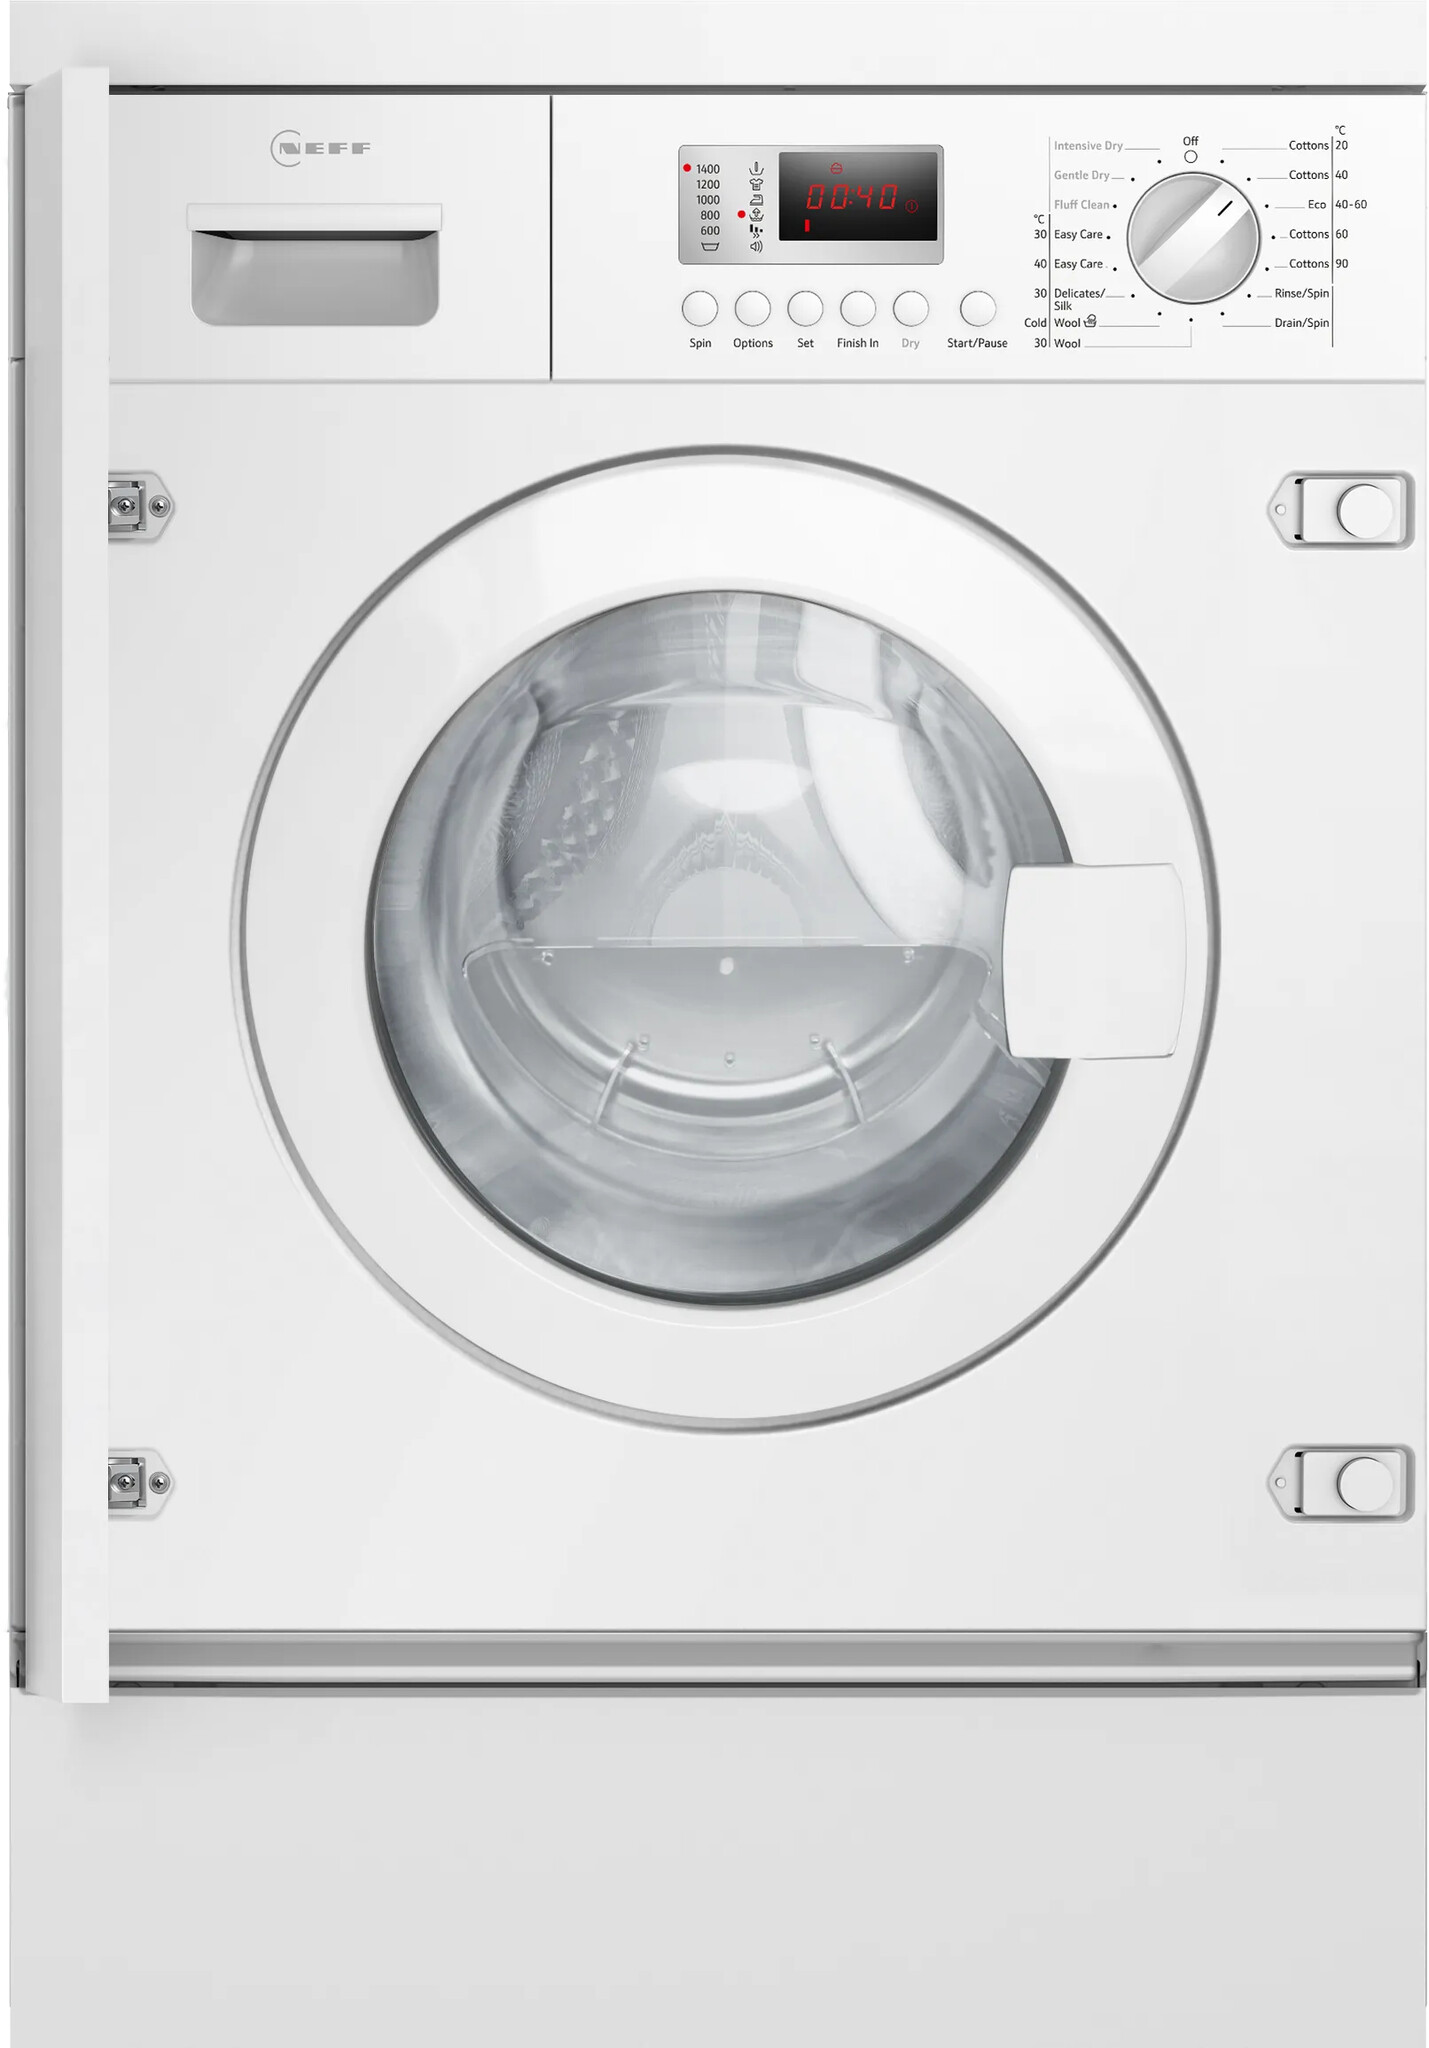 NEFF V6320X2GB Integrated 7Kg / 4Kg Washer Dryer 1355 rpm White E Rated #357556